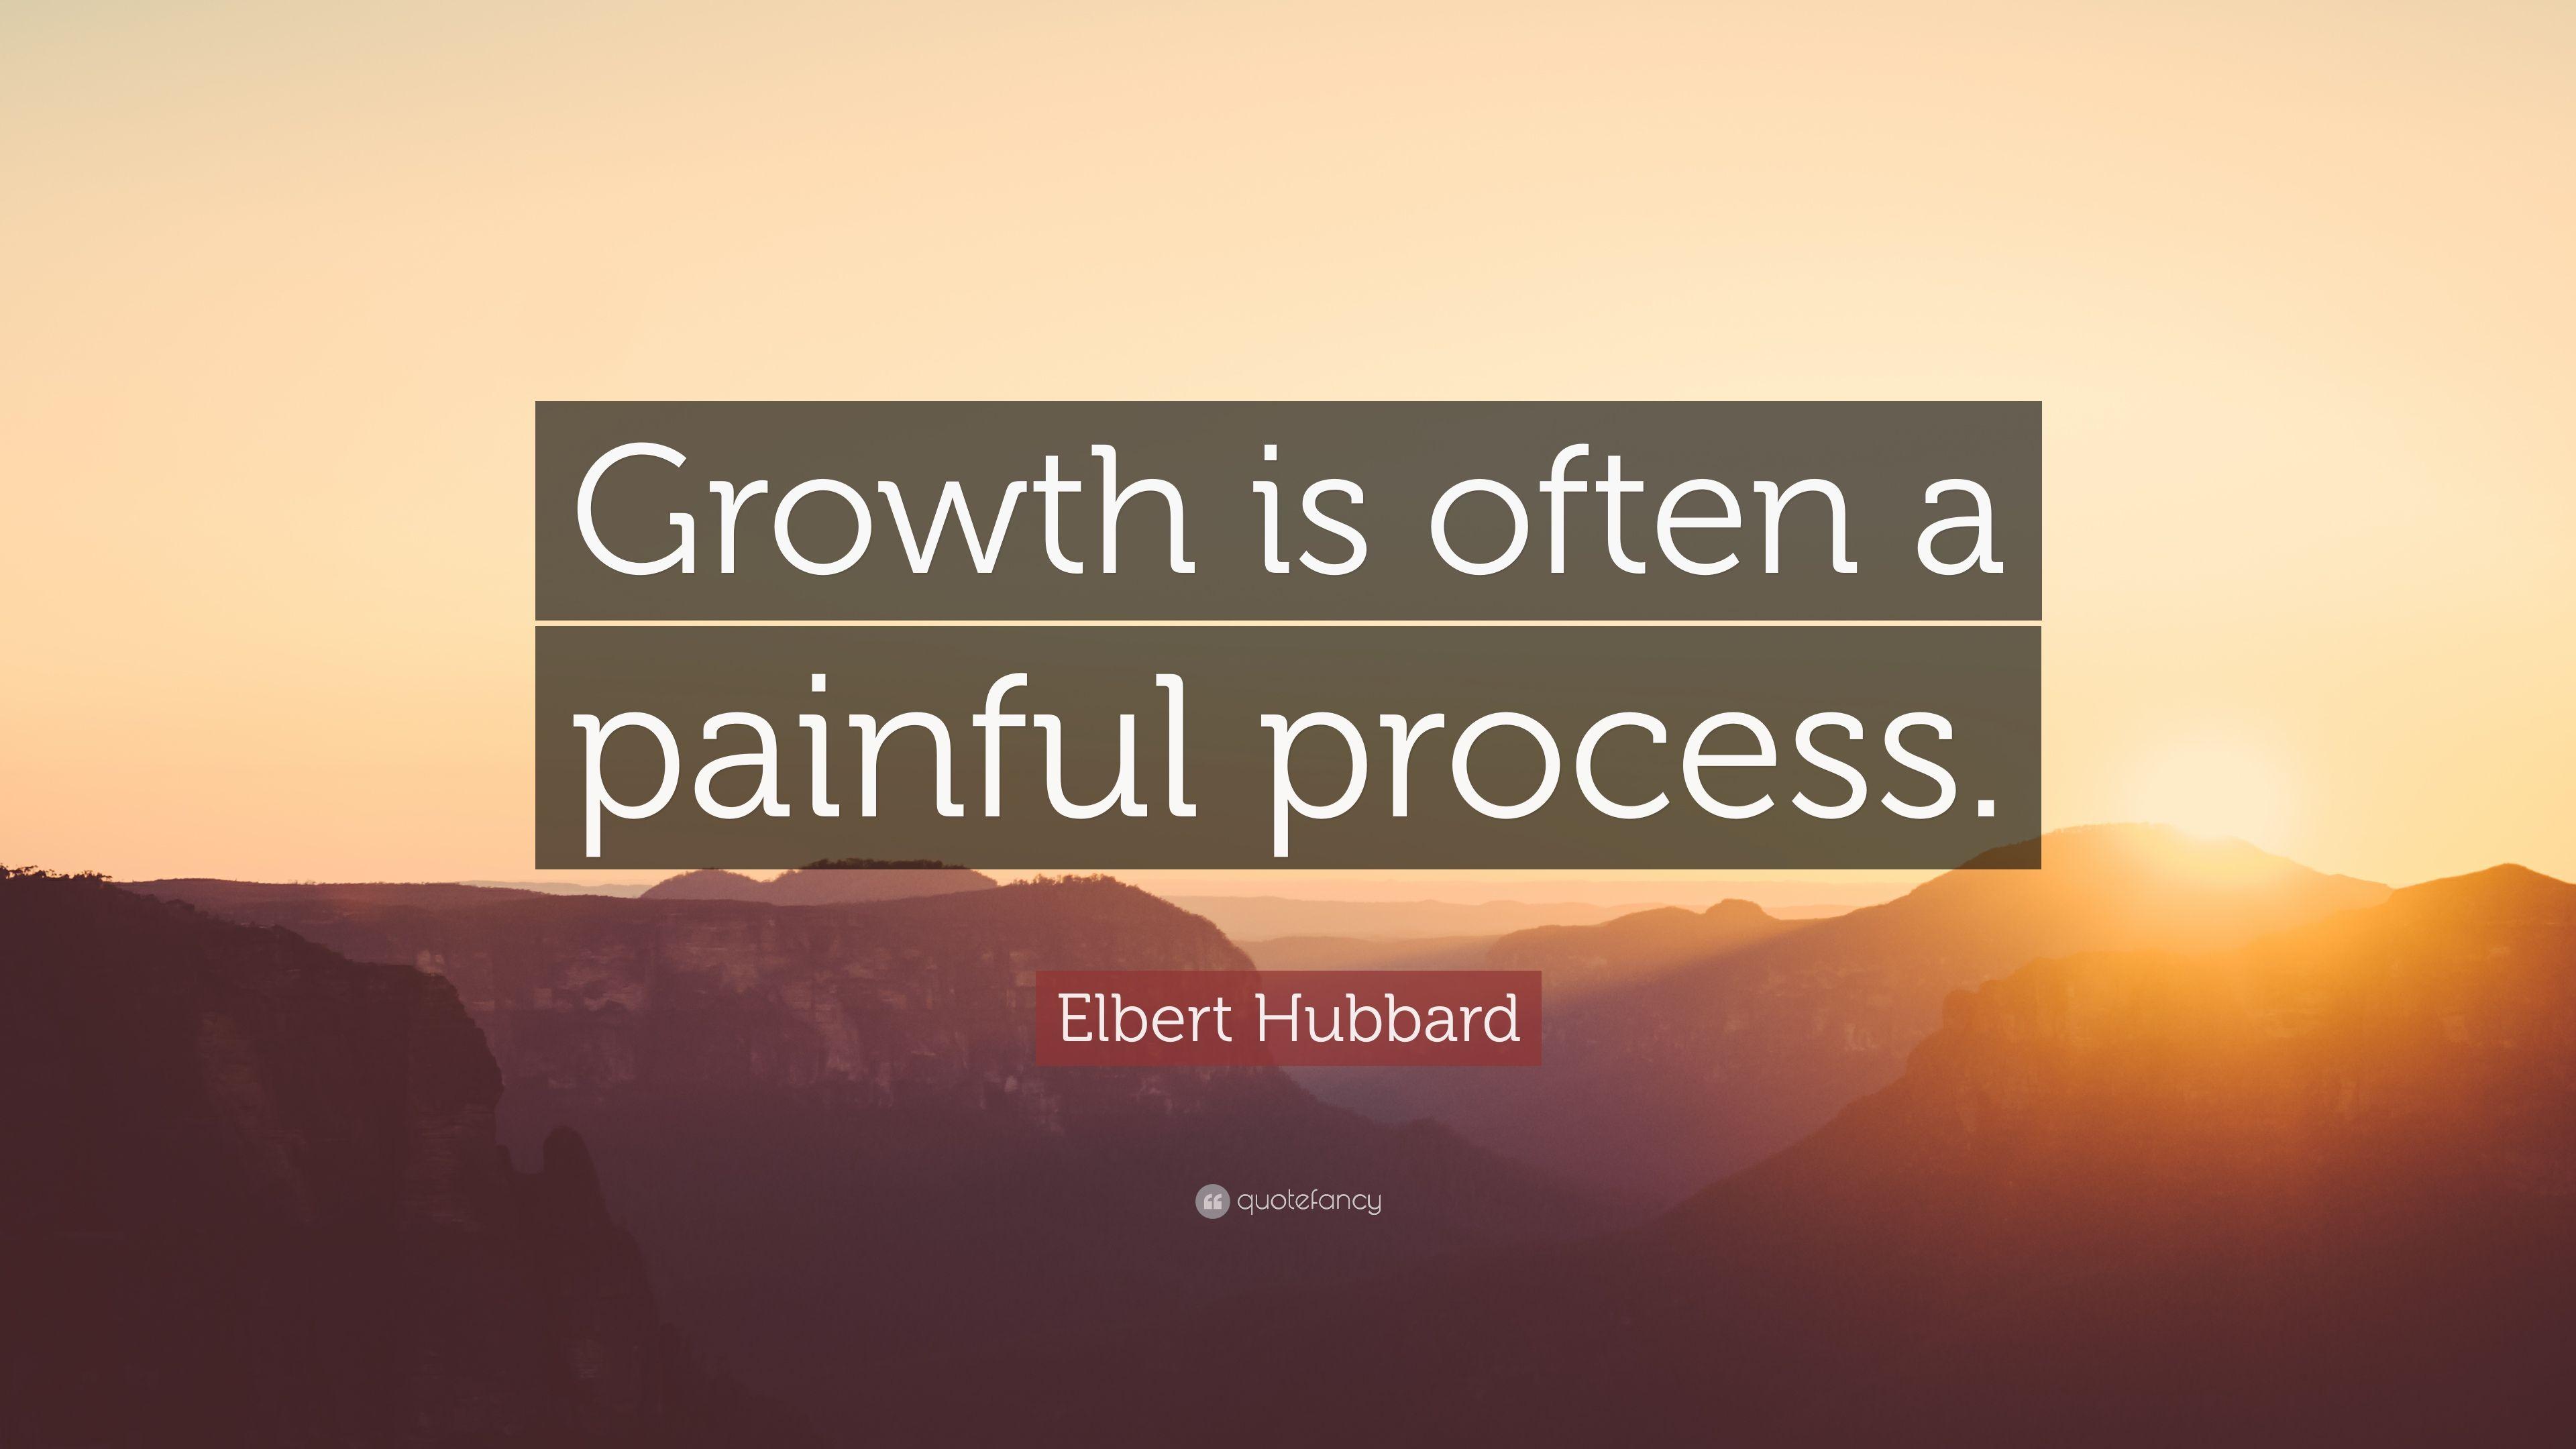 Elbert Hubbard Quote: “Growth is often a painful process.” 12